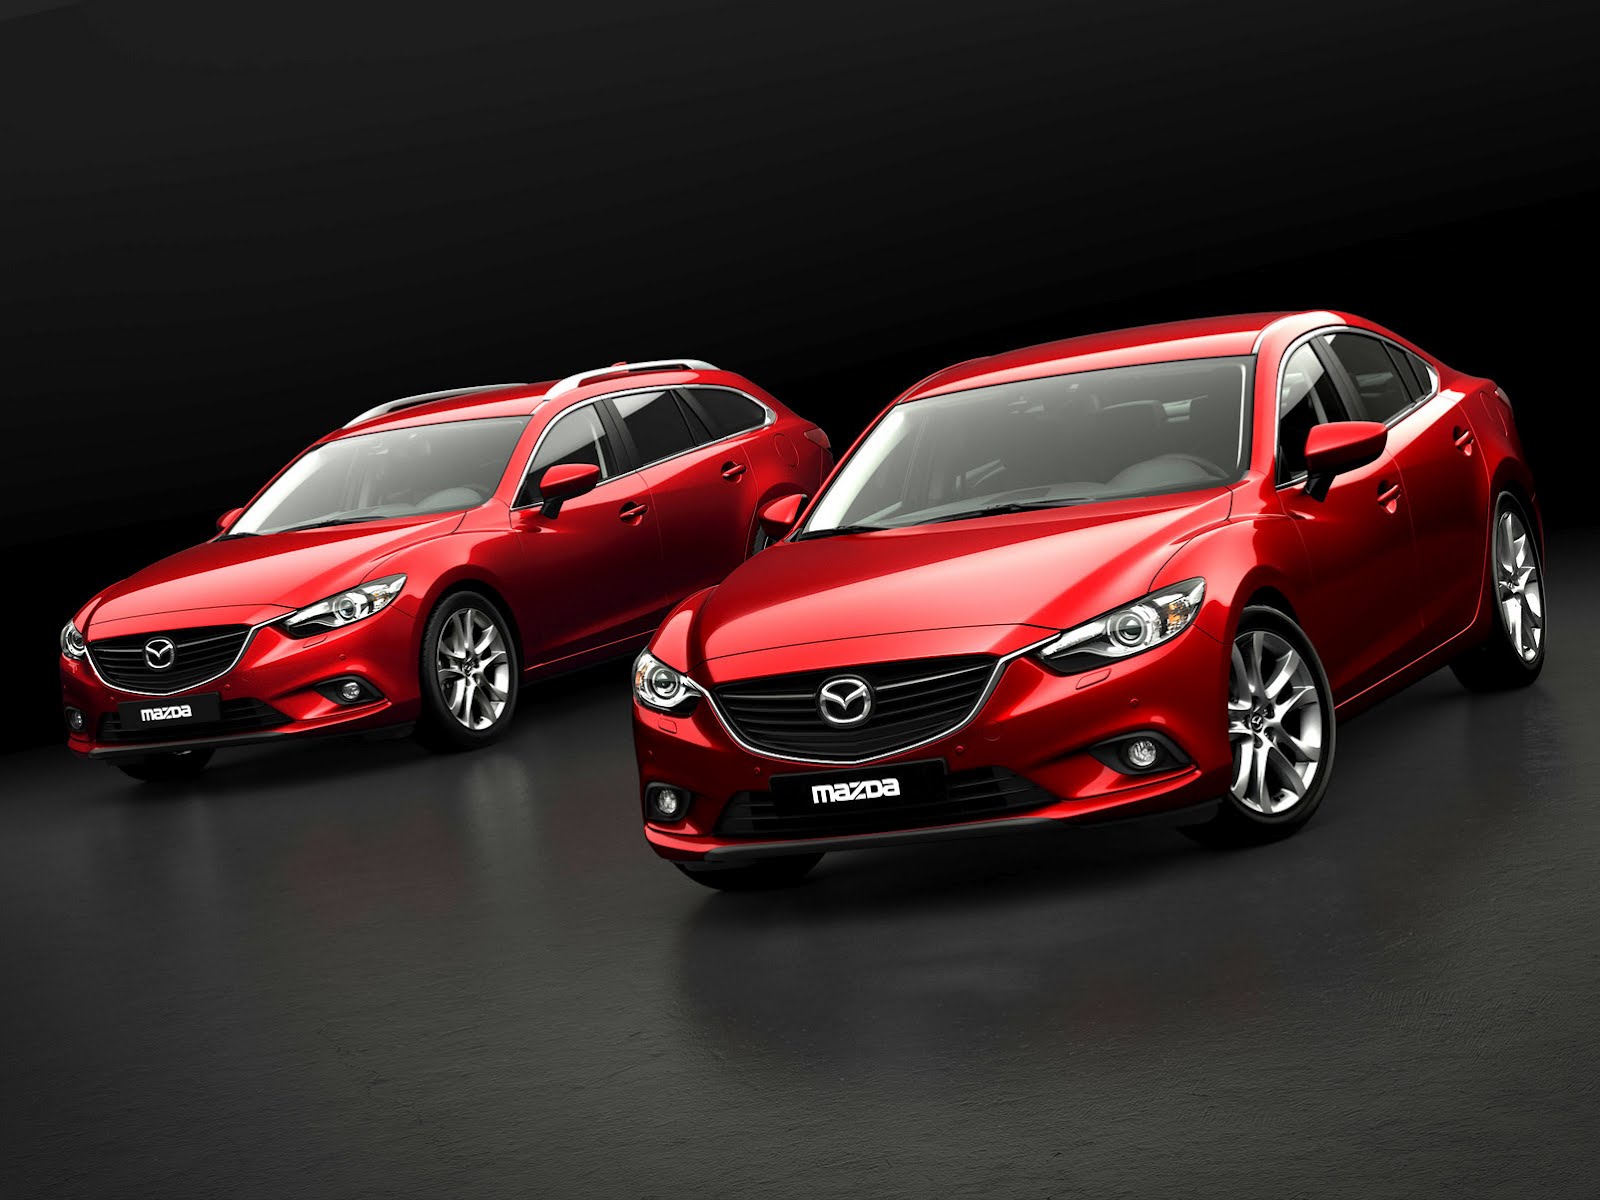 2013 Mazda 6 Wagon. The more practical and roomier (at least in terms of